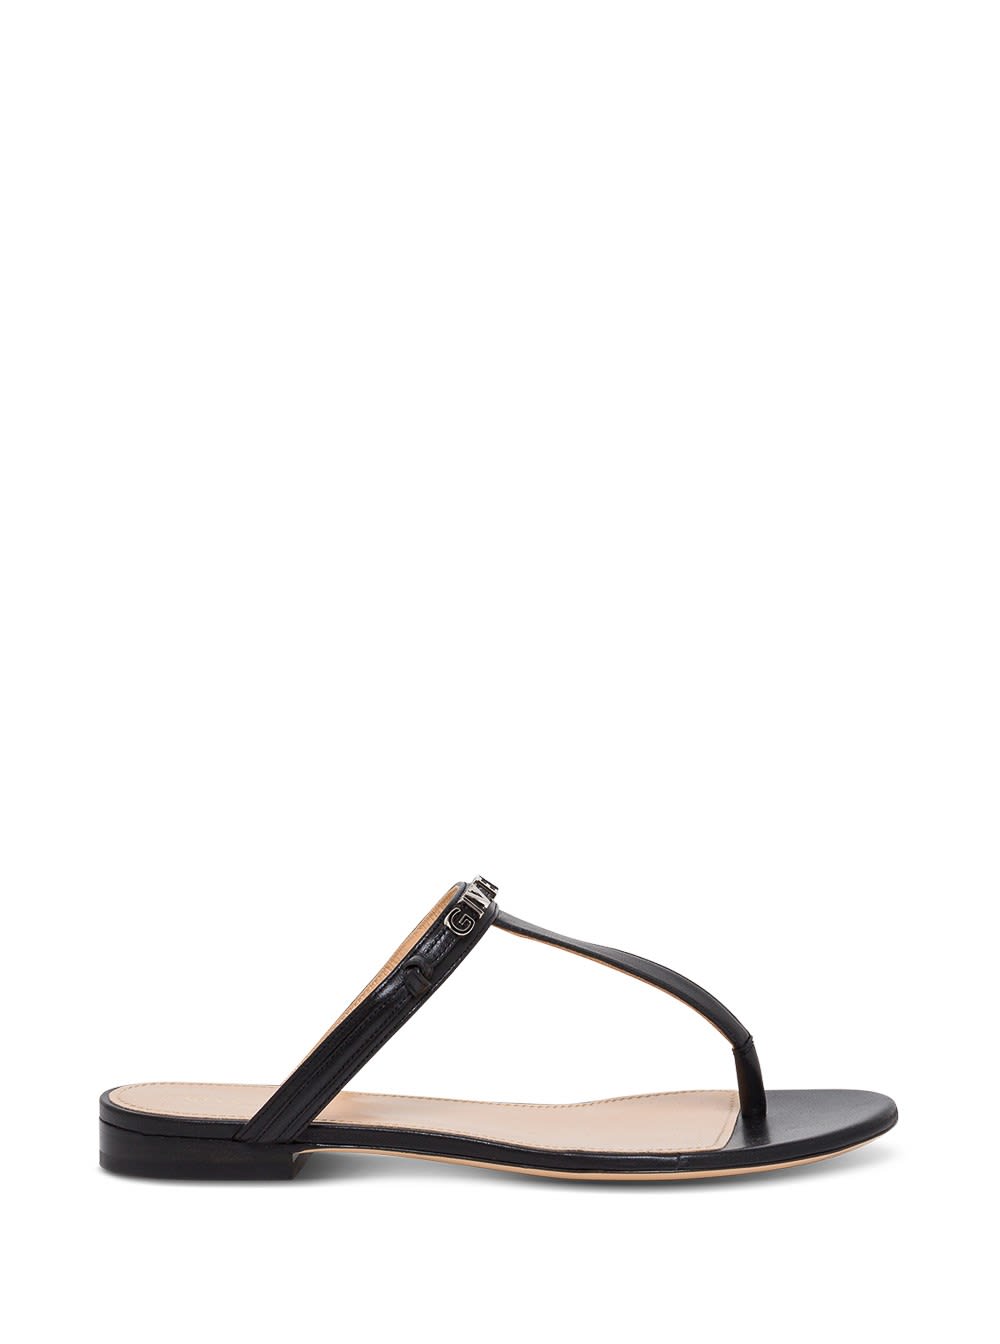 Buy Givenchy Black Leather Sandals With Logo online, shop Givenchy shoes with free shipping